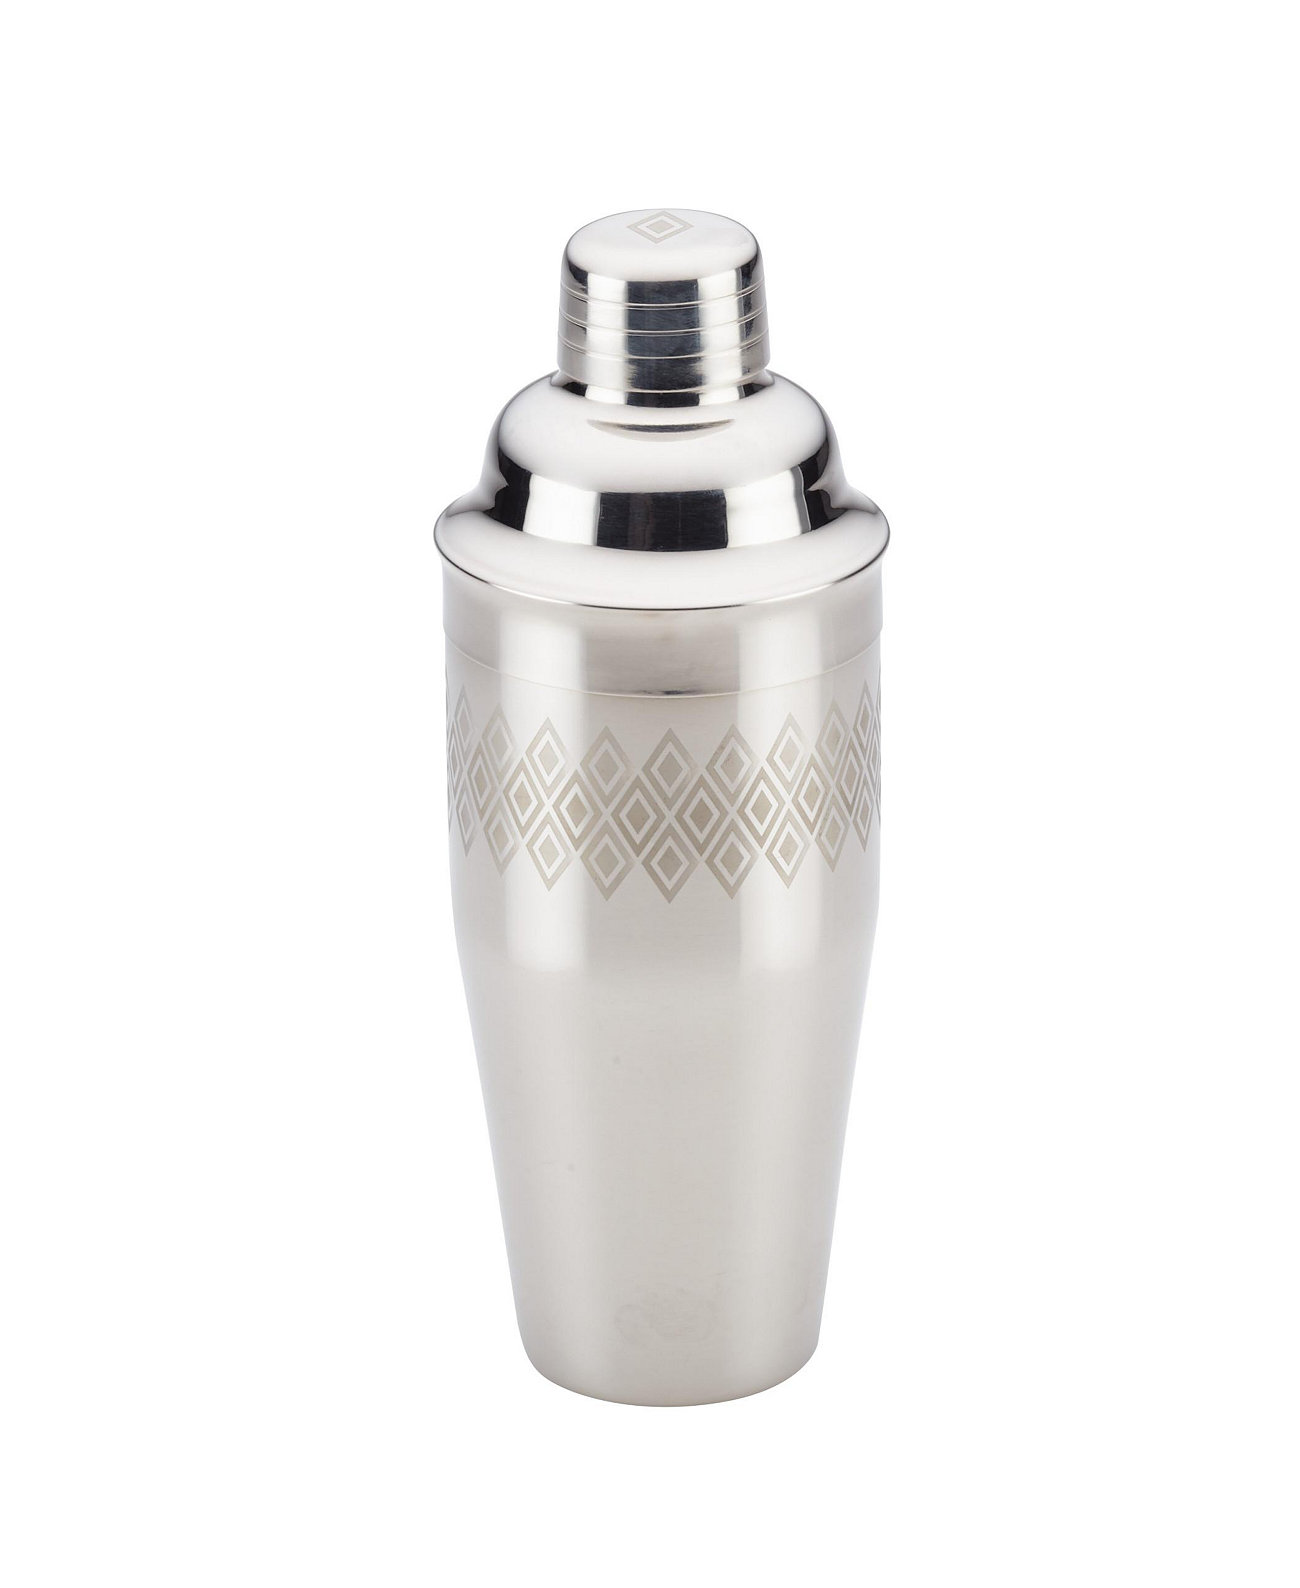 Ayesha Barware 4-in-1 Stainless Steel Cocktail Shaker with Juicer Ayesha Curry